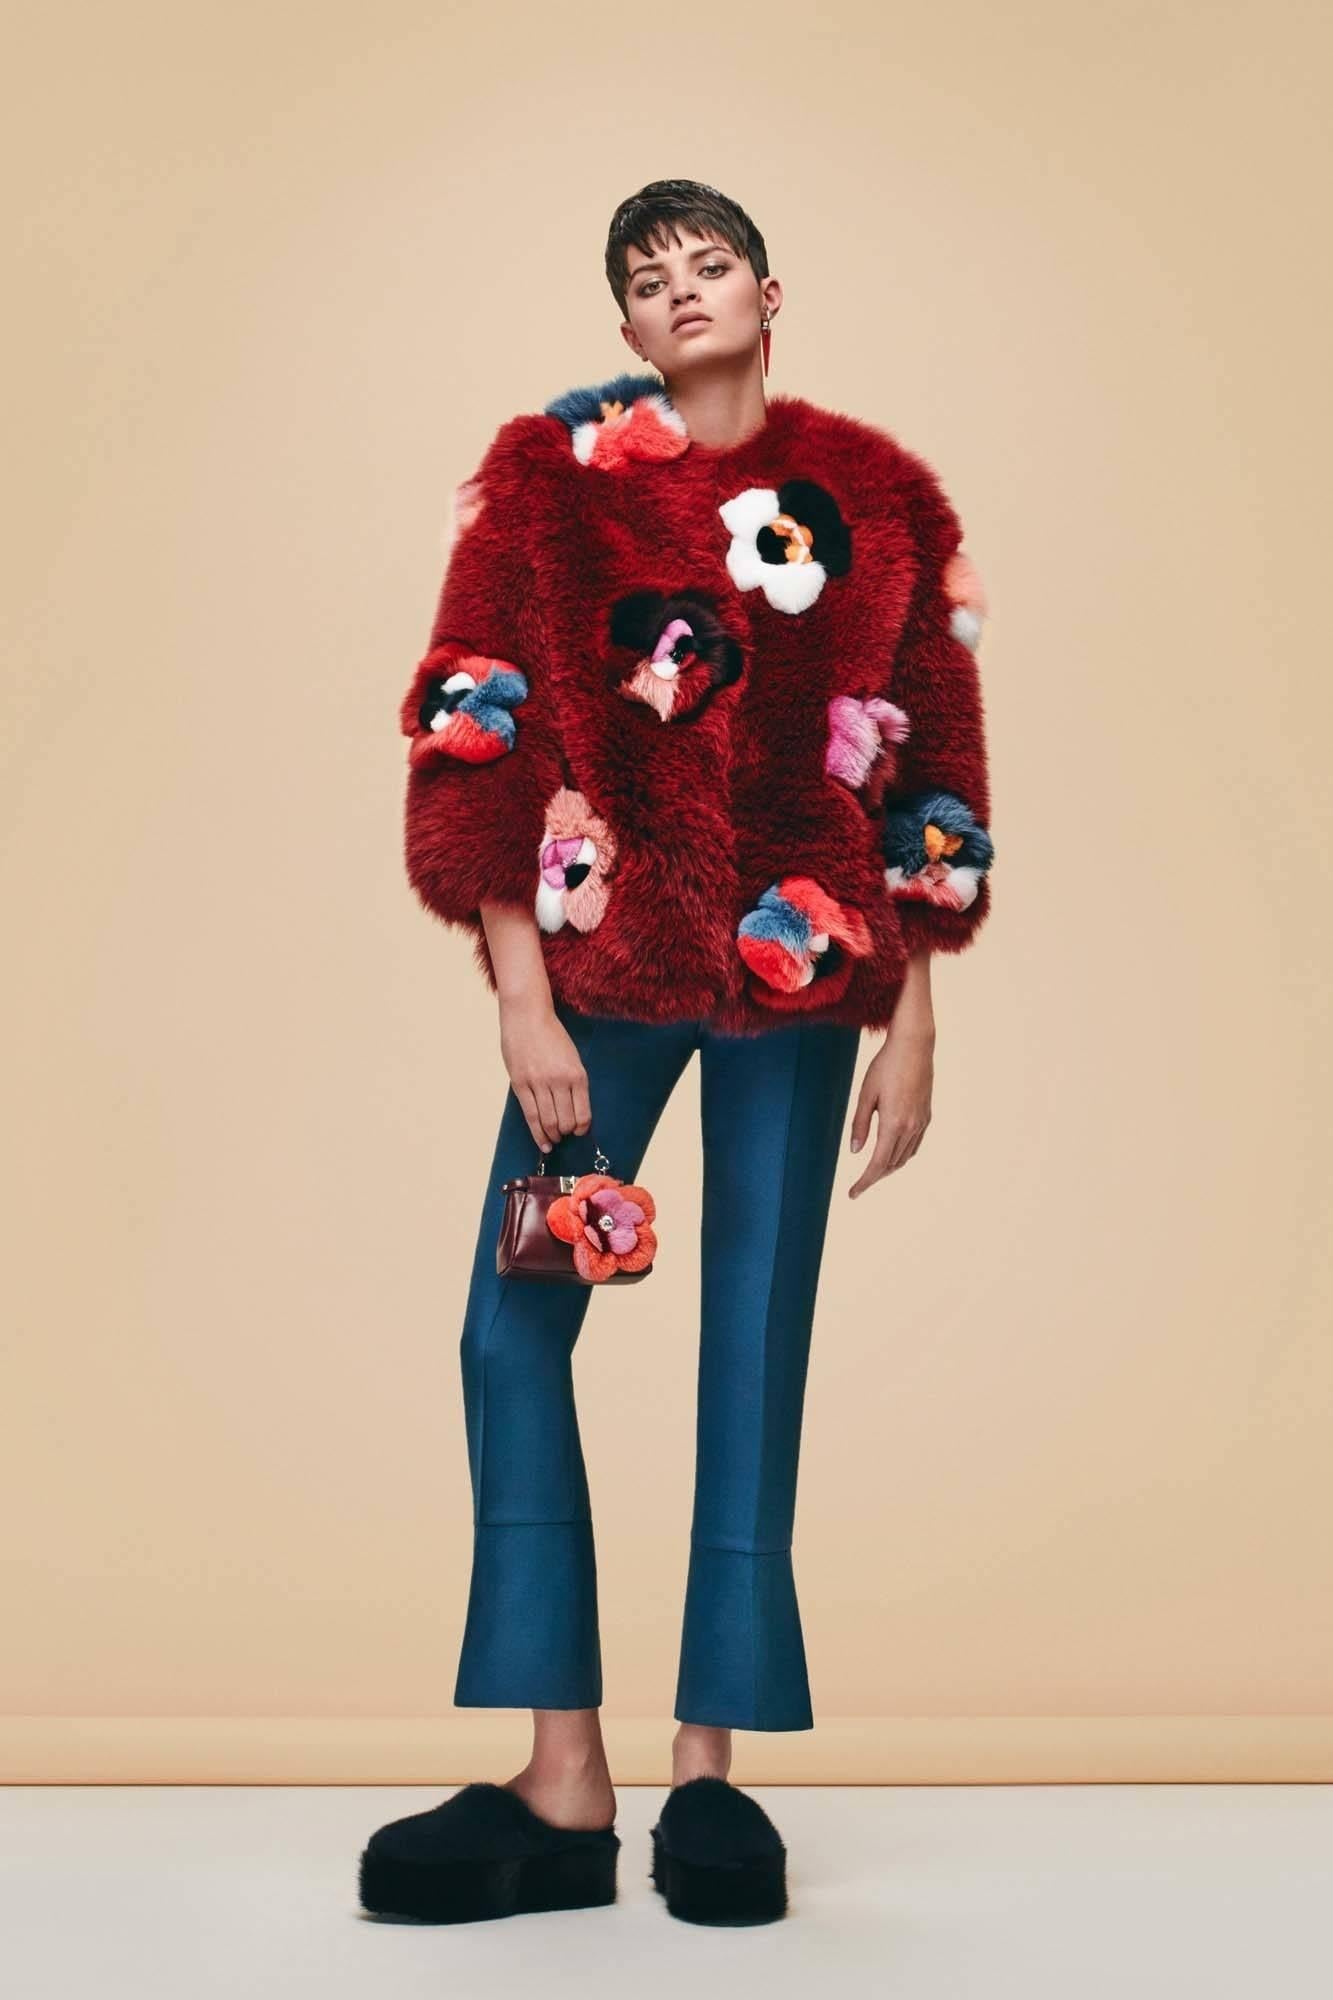 Fendi Ruby Red Fox Fur & Flower Applique Jacket Sz IT40
From pre-Autumn/Winter 2016 Collection

Made In: Italy
Color: Ruby red, multi-color
Composition: Fox fur
Closure/Opening: Hidden front hook and eye closure
Exterior/Interior Pockets: